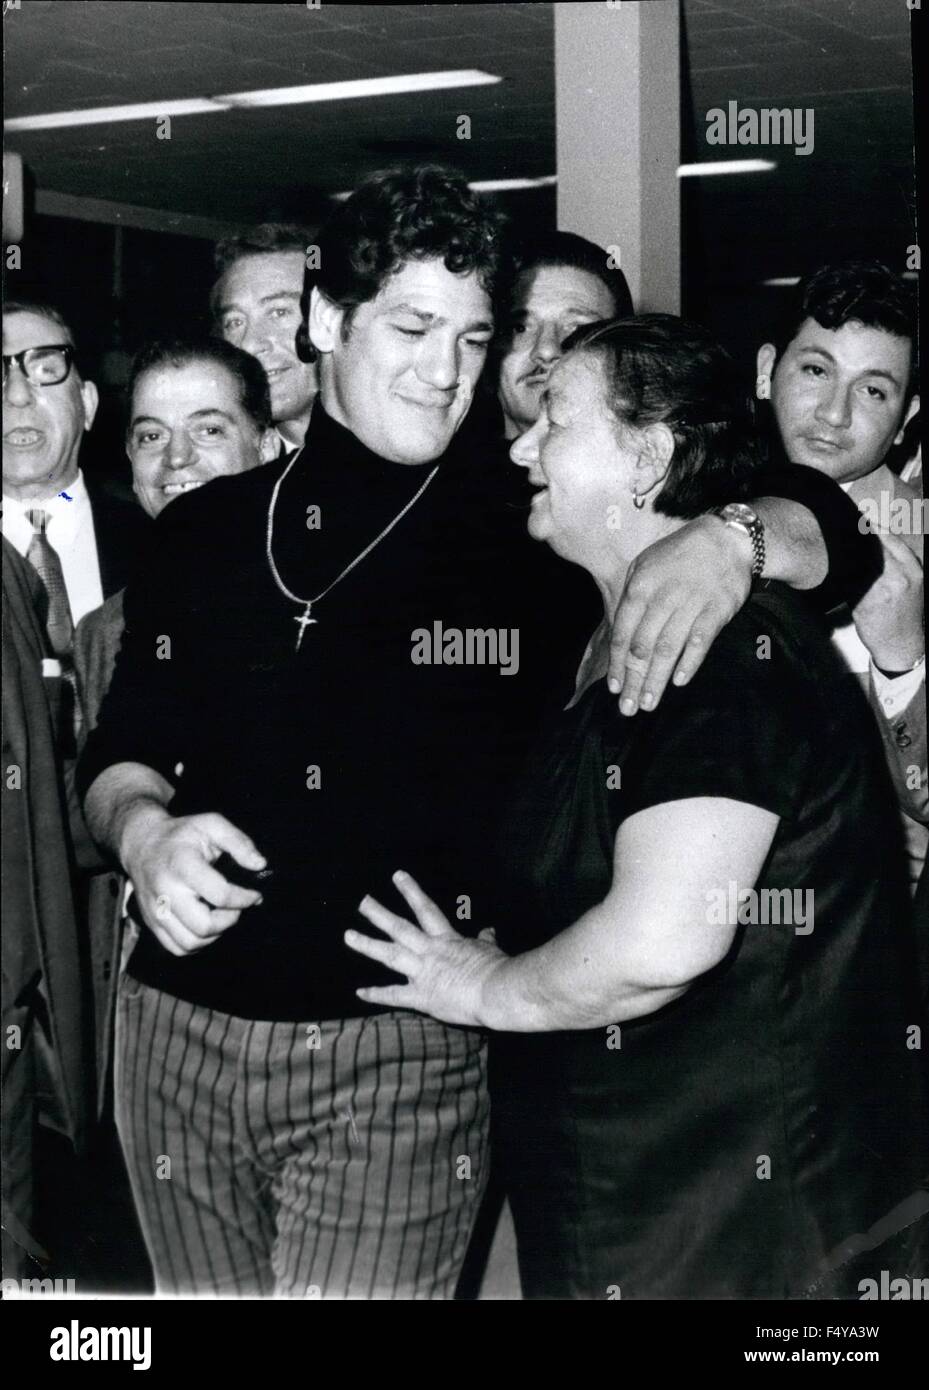 1968 - The tragic end of an Argentine Heavyweight Boxer in United States. Buenos Aires, May 25th 1976. This is Oscar Natalio Bonavena, one of the outstanding Argentine boxers in a recent picture showing him after returning from one of his matches and showing him with his mother always so proud on her son. And now all has finished due to the fact. Bonavena was assasinated near Reno, Nevada under gangster like circumstances. - Bonavena was the 7th ranking boxer in the world category. © Keystone Pictures USA/ZUMAPRESS.com/Alamy Live News Stock Photo